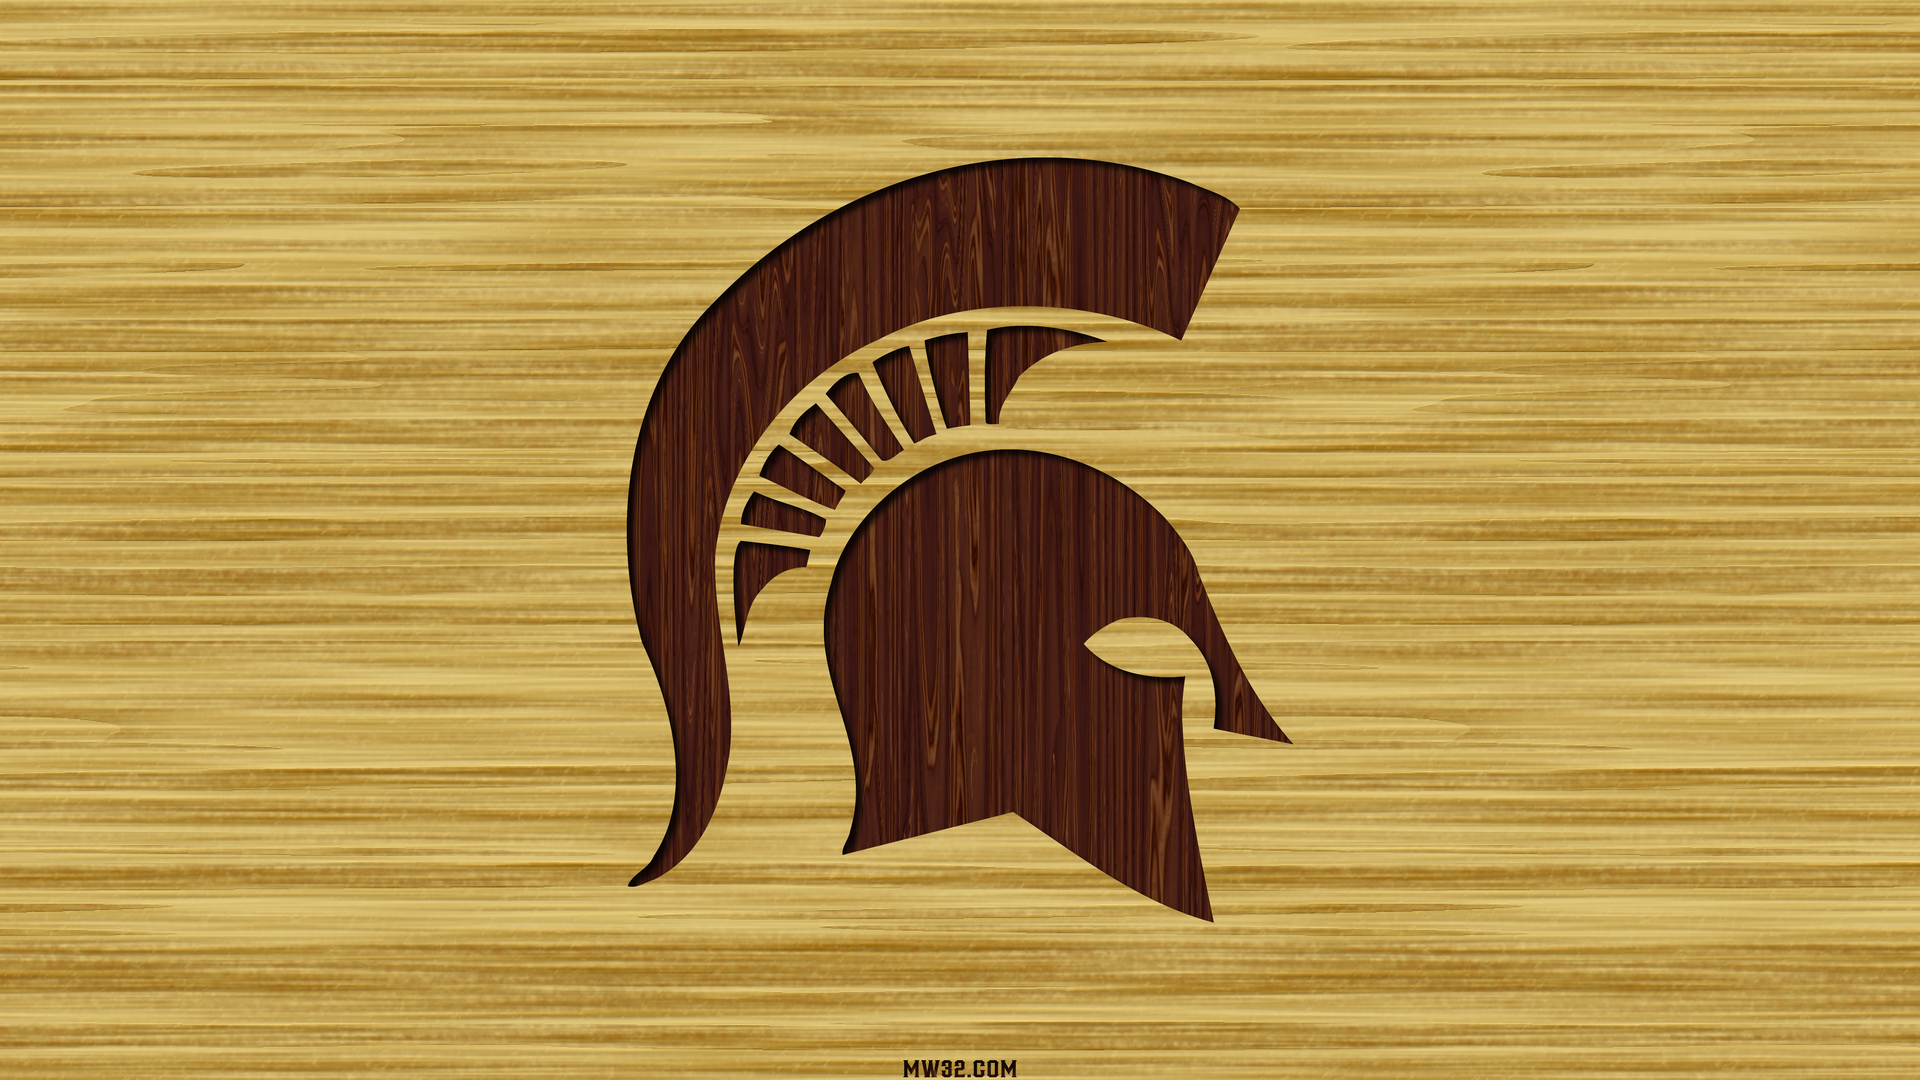 Michigan State Basketball Court Wallpaper Image Pictures Becuo